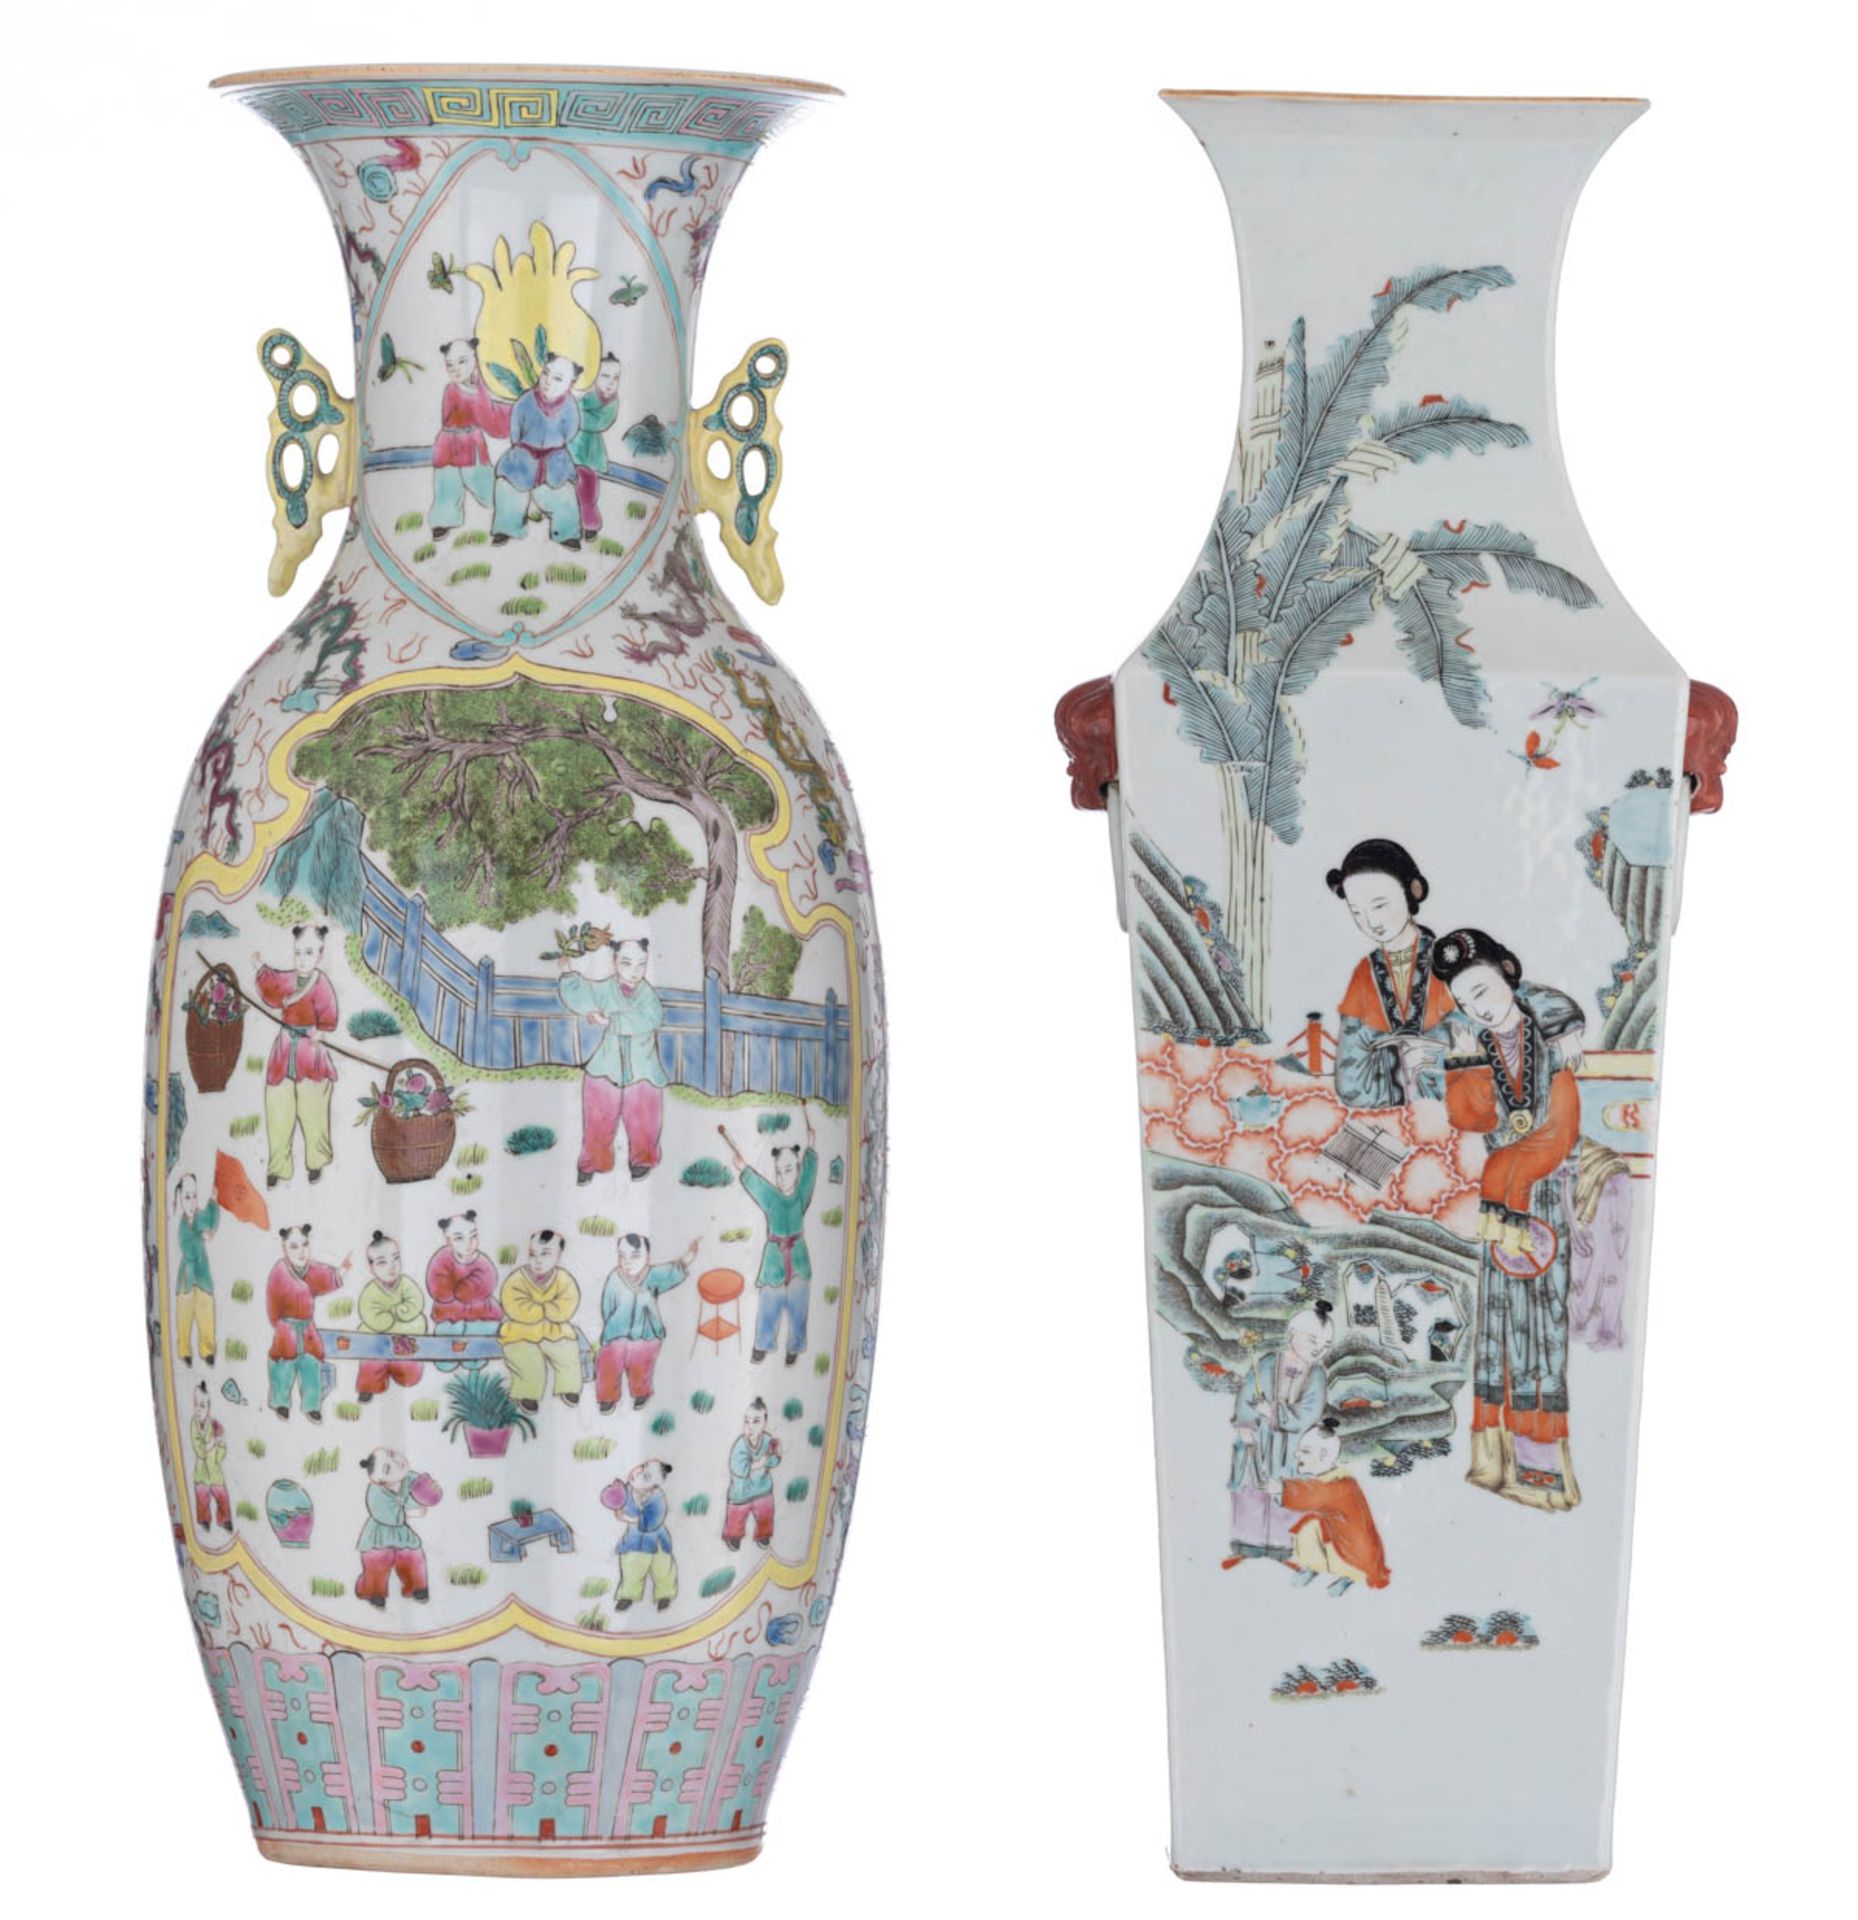 A Chinese Qianjiang cai fanghu vase with double decoration